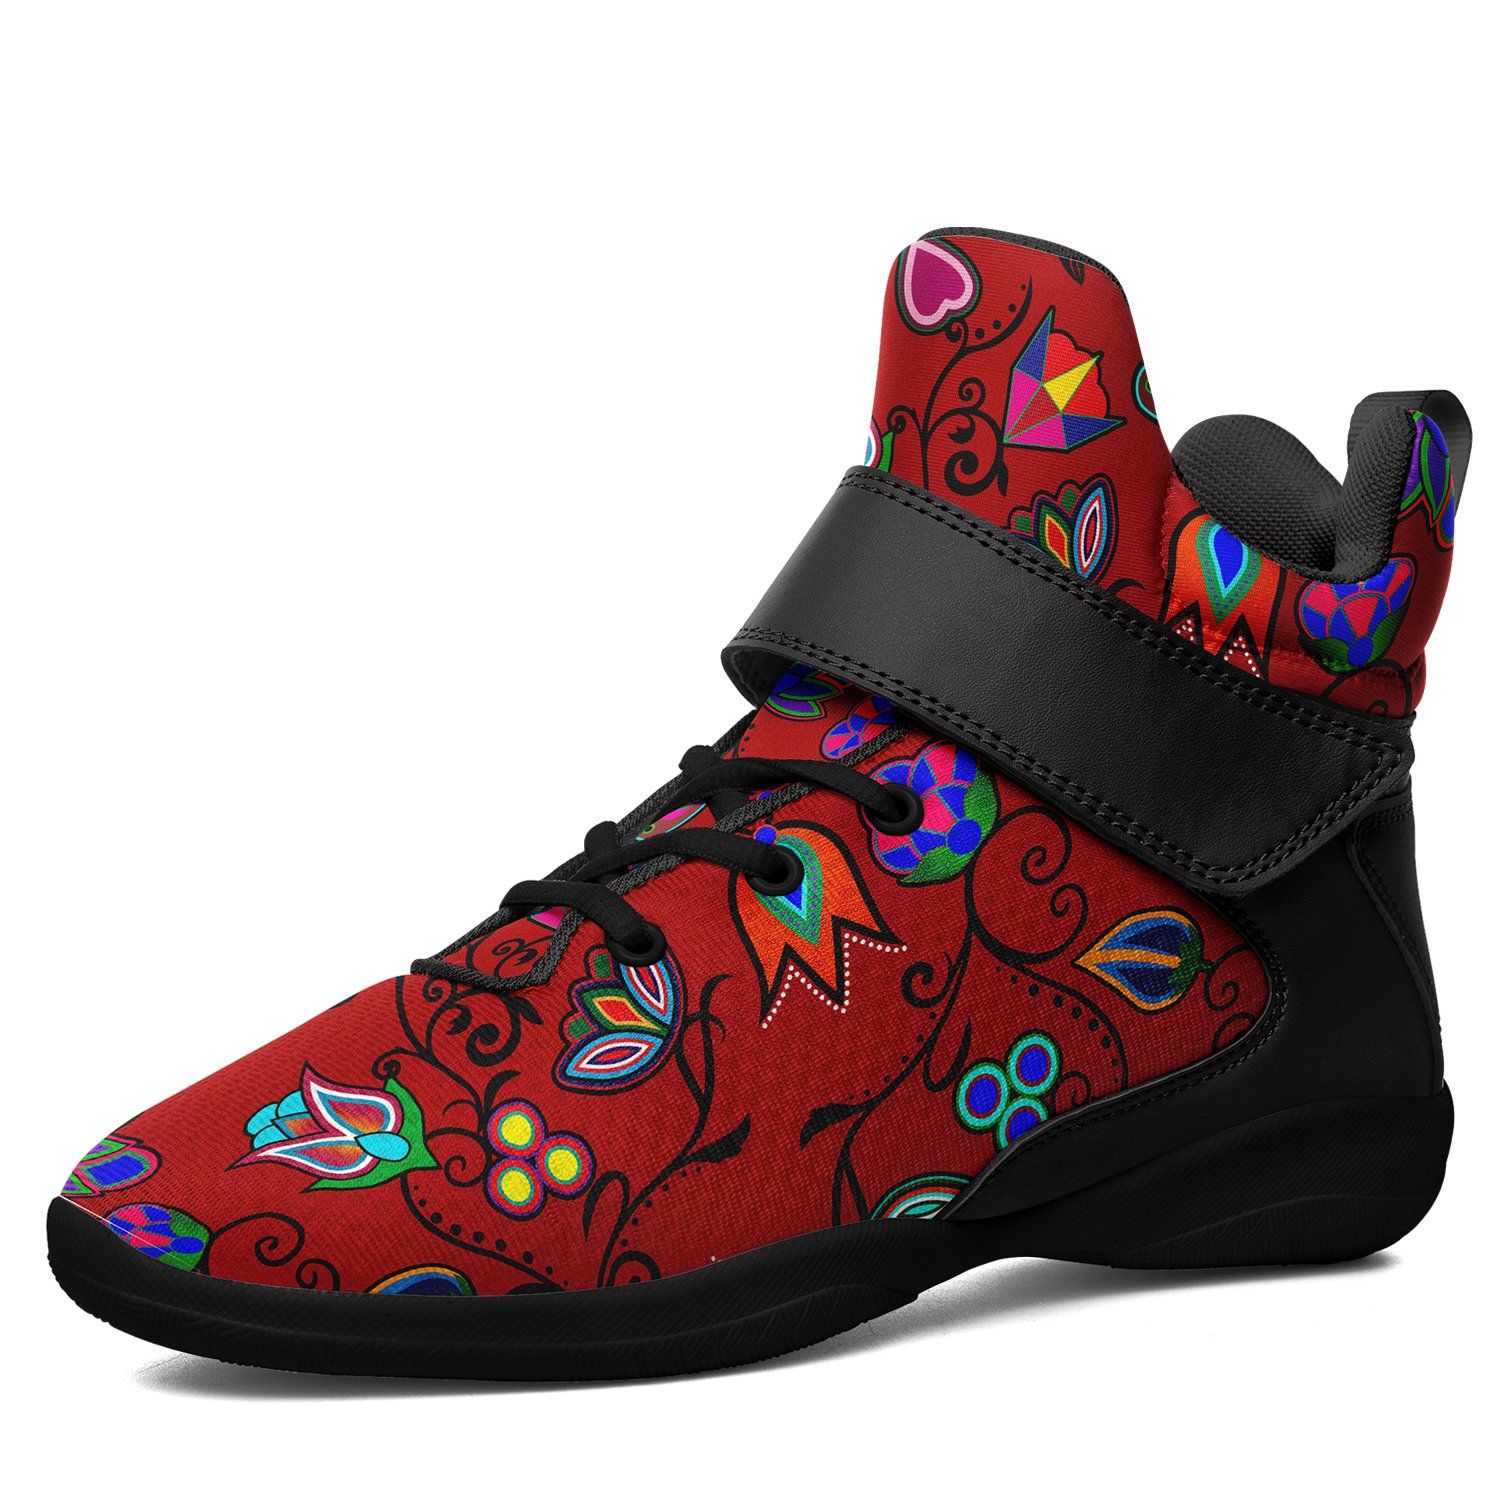 Indigenous Paisley Dahlia Ipottaa Basketball / Sport High Top Shoes 49 Dzine US Women 4.5 / US Youth 3.5 / EUR 35 Black Sole with Black Strap 